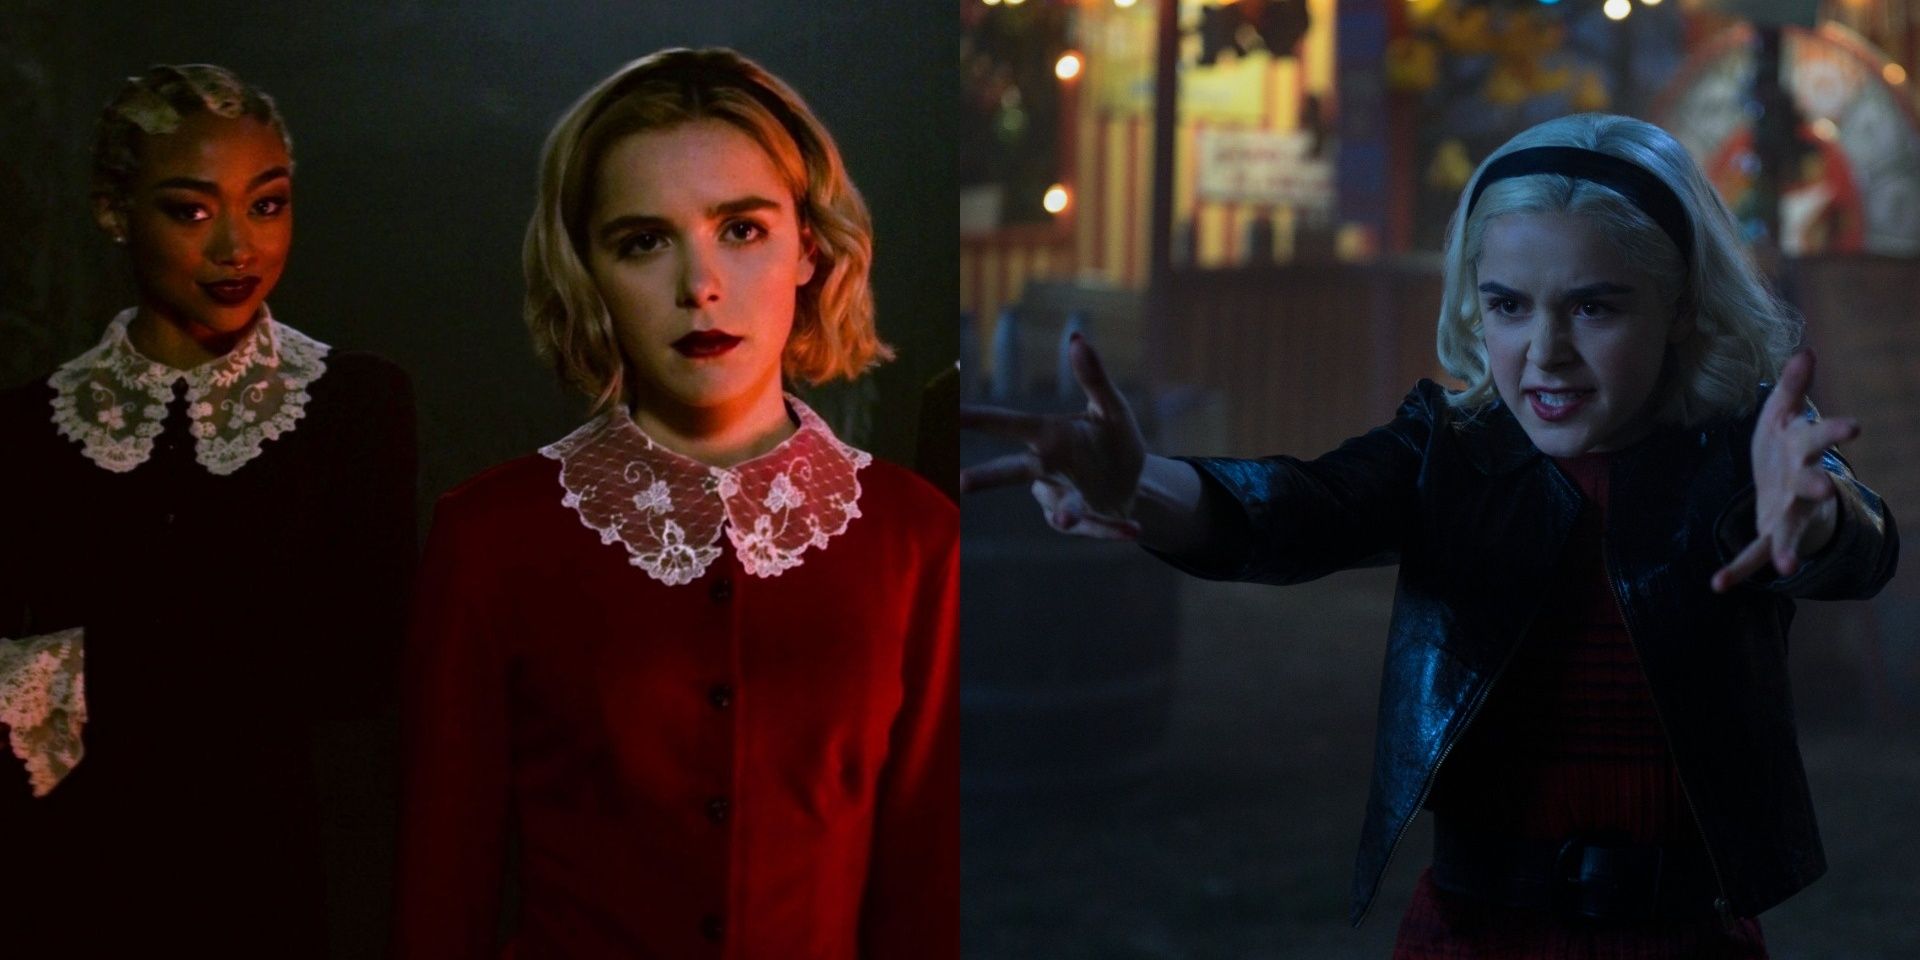 Chilling Adventures Of Sabrina 10 Unpopular Opinions According To Reddit RELATED Ranking Chilling Adventures Of Sabrina Couples From Worst To Best